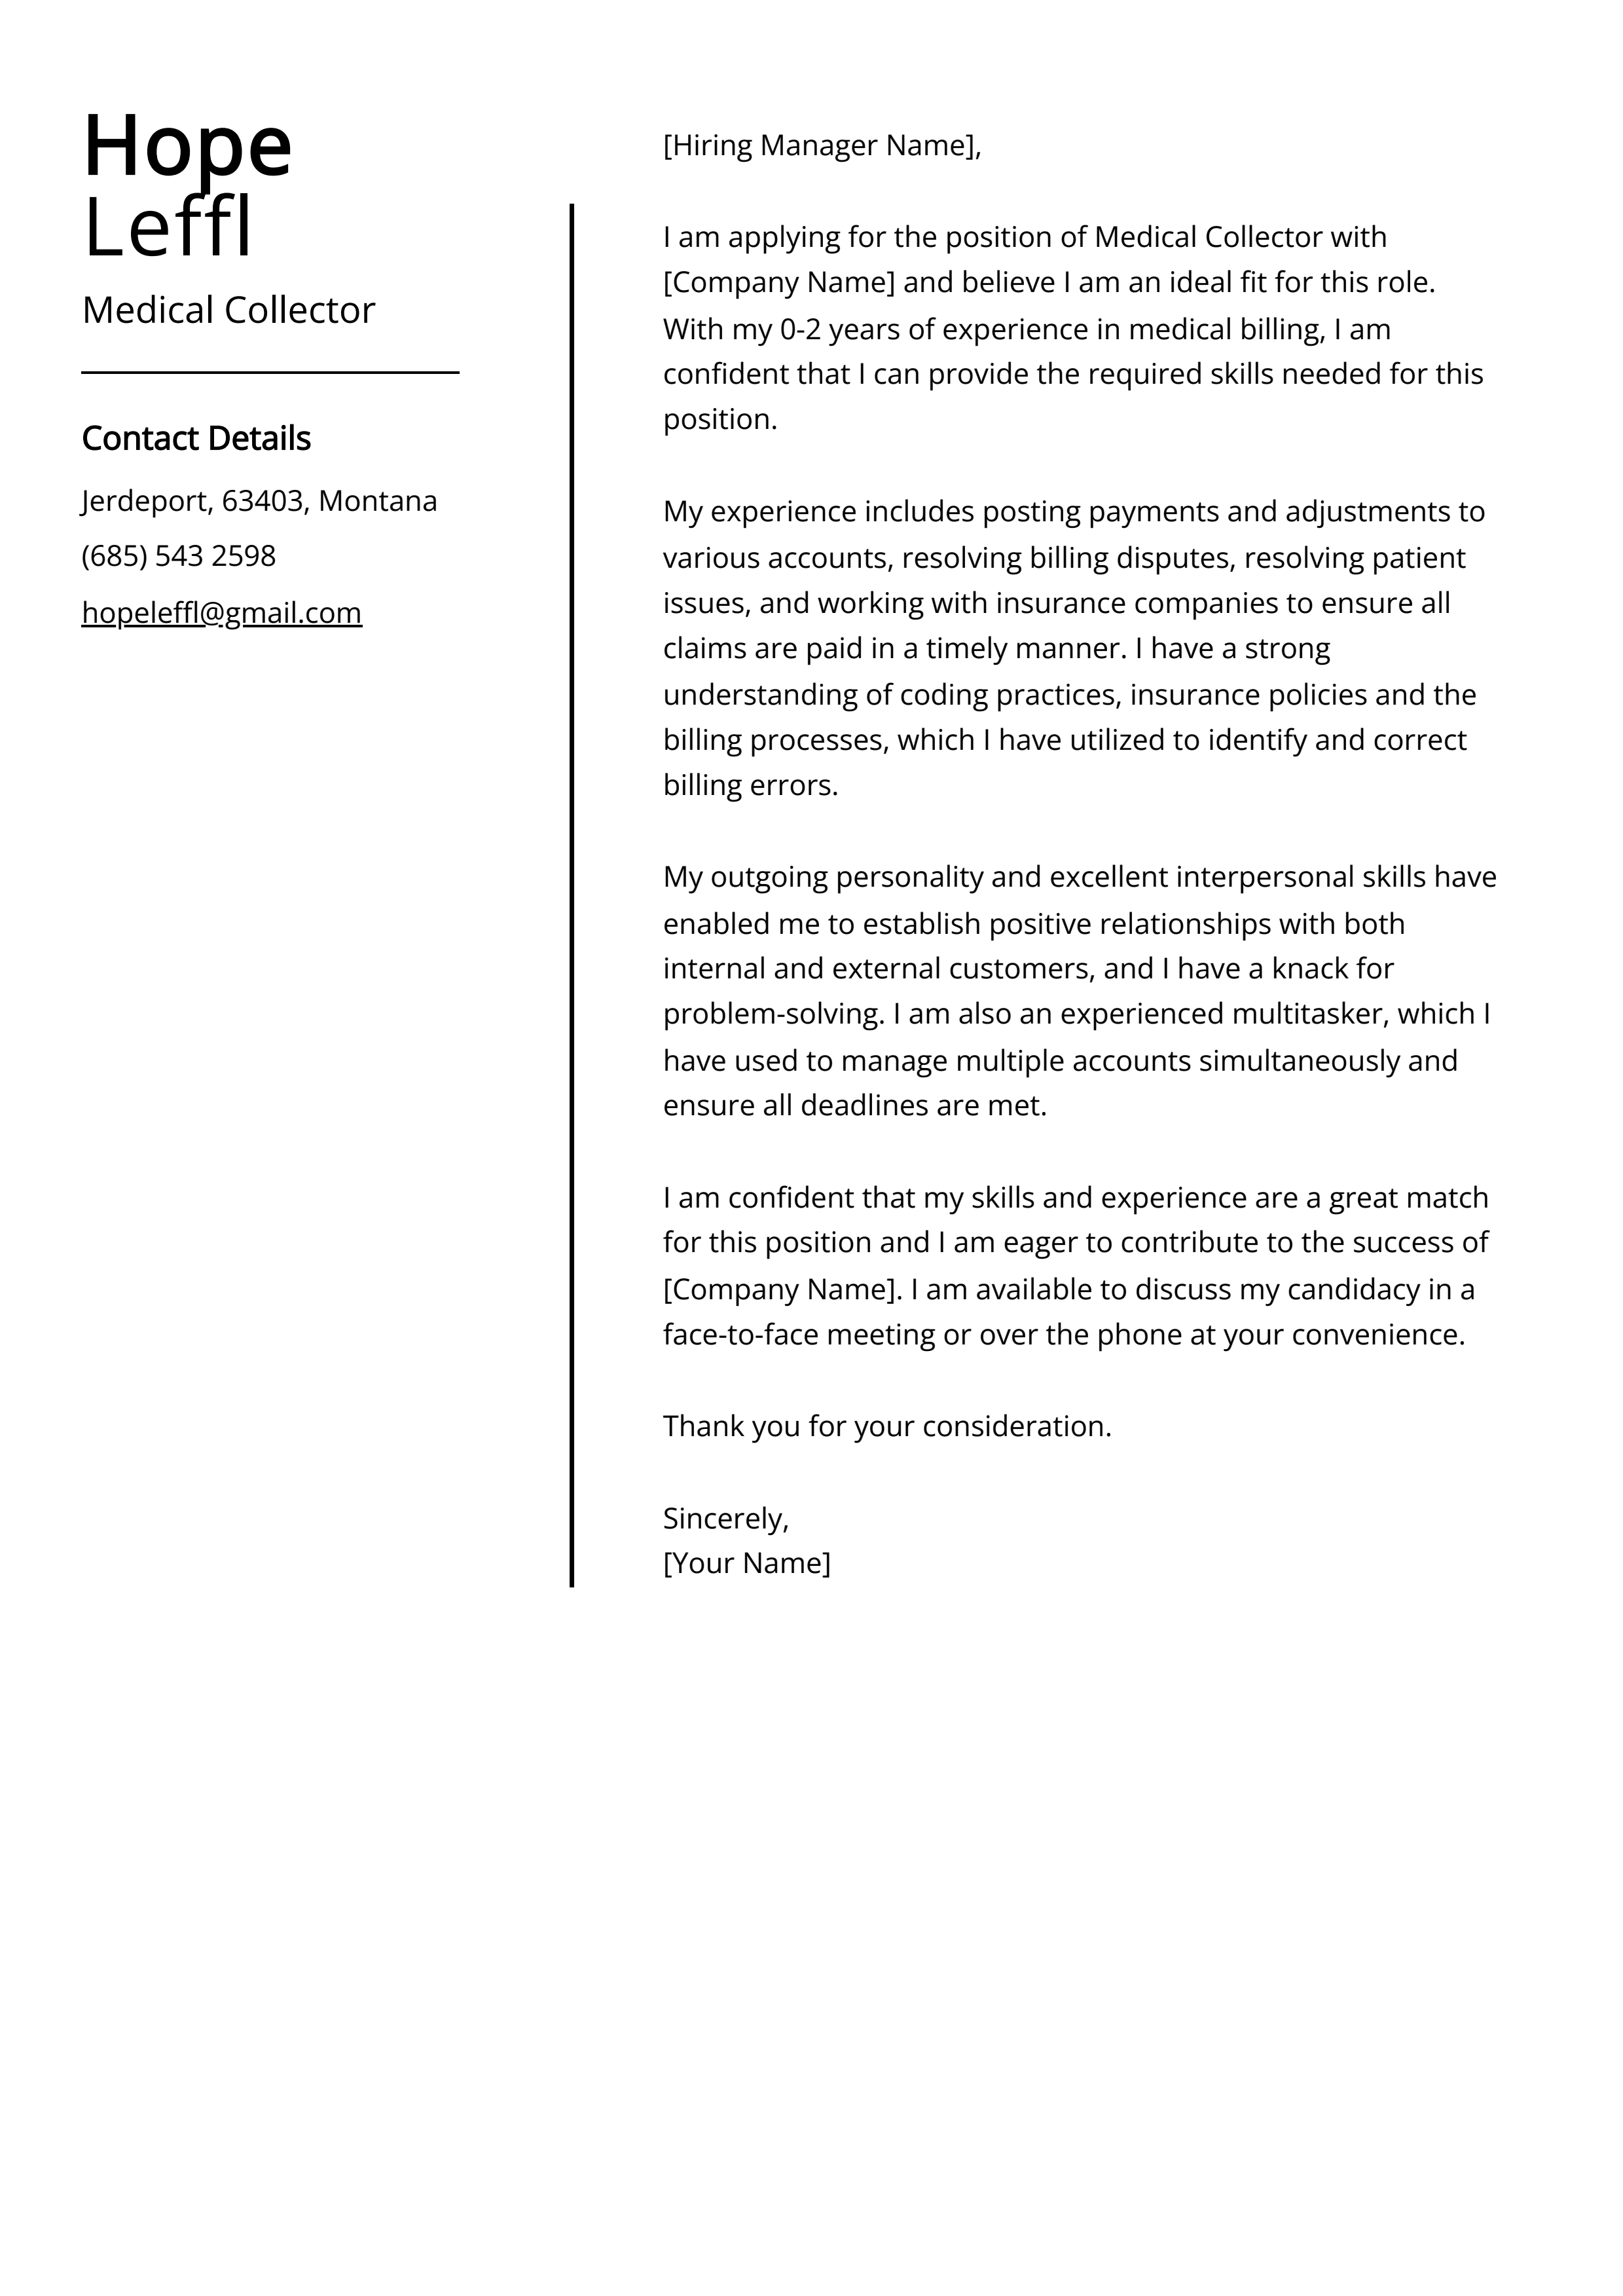 Medical Collector Cover Letter Example